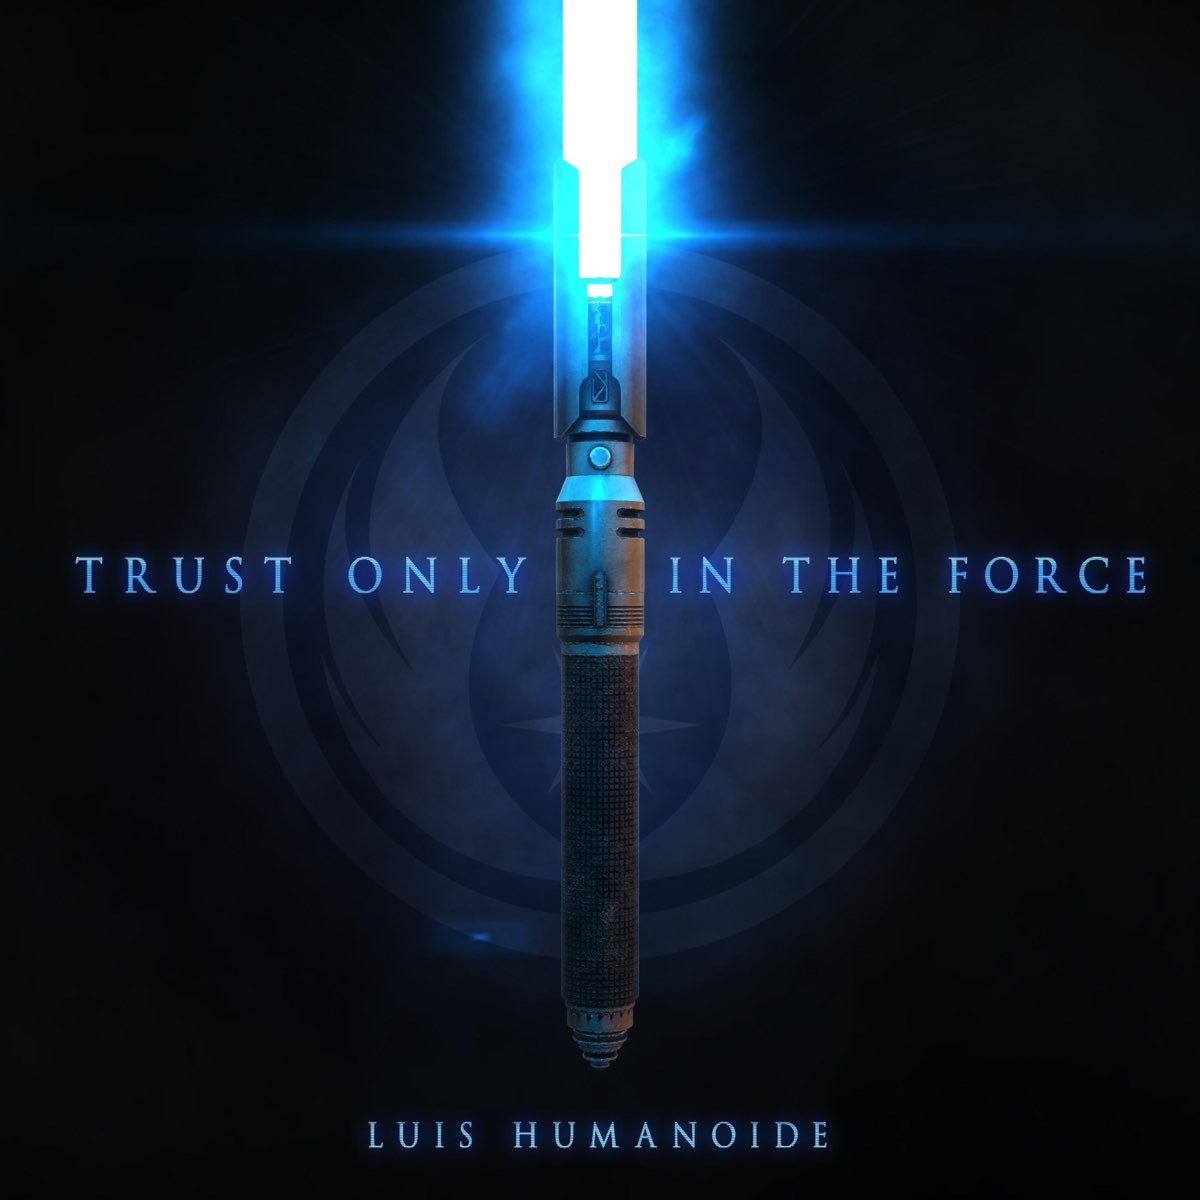 Only trust. Trust only in the Force. Only Force электронная. Only Force электроника. Relying solely.